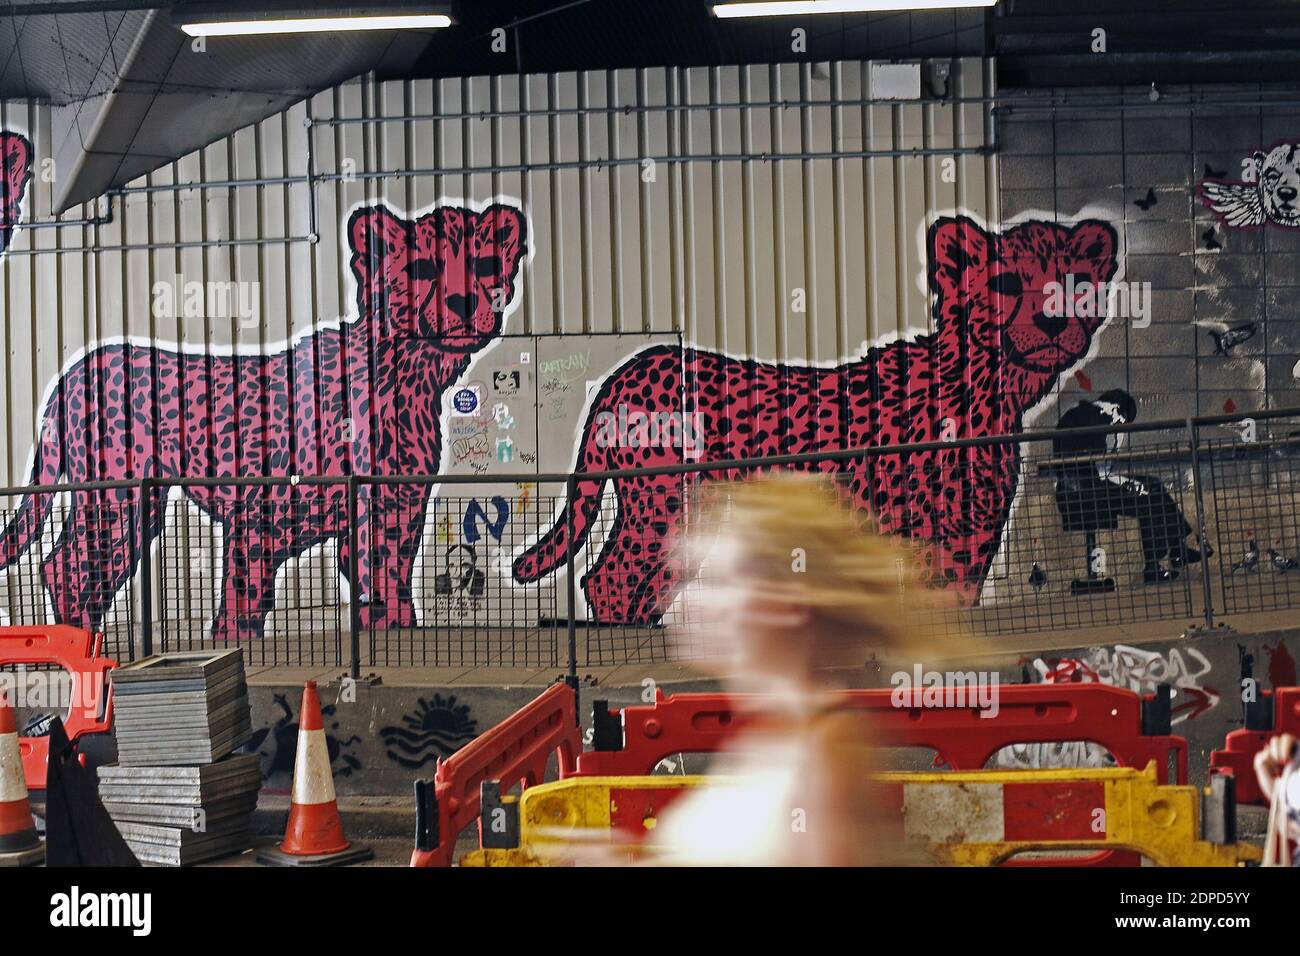 GREAT BRITAIN / London/ Street Art /A woman walks past a  graffiti artwork /A subway painted by stencil artists at a giant new exhibition space create Stock Photo